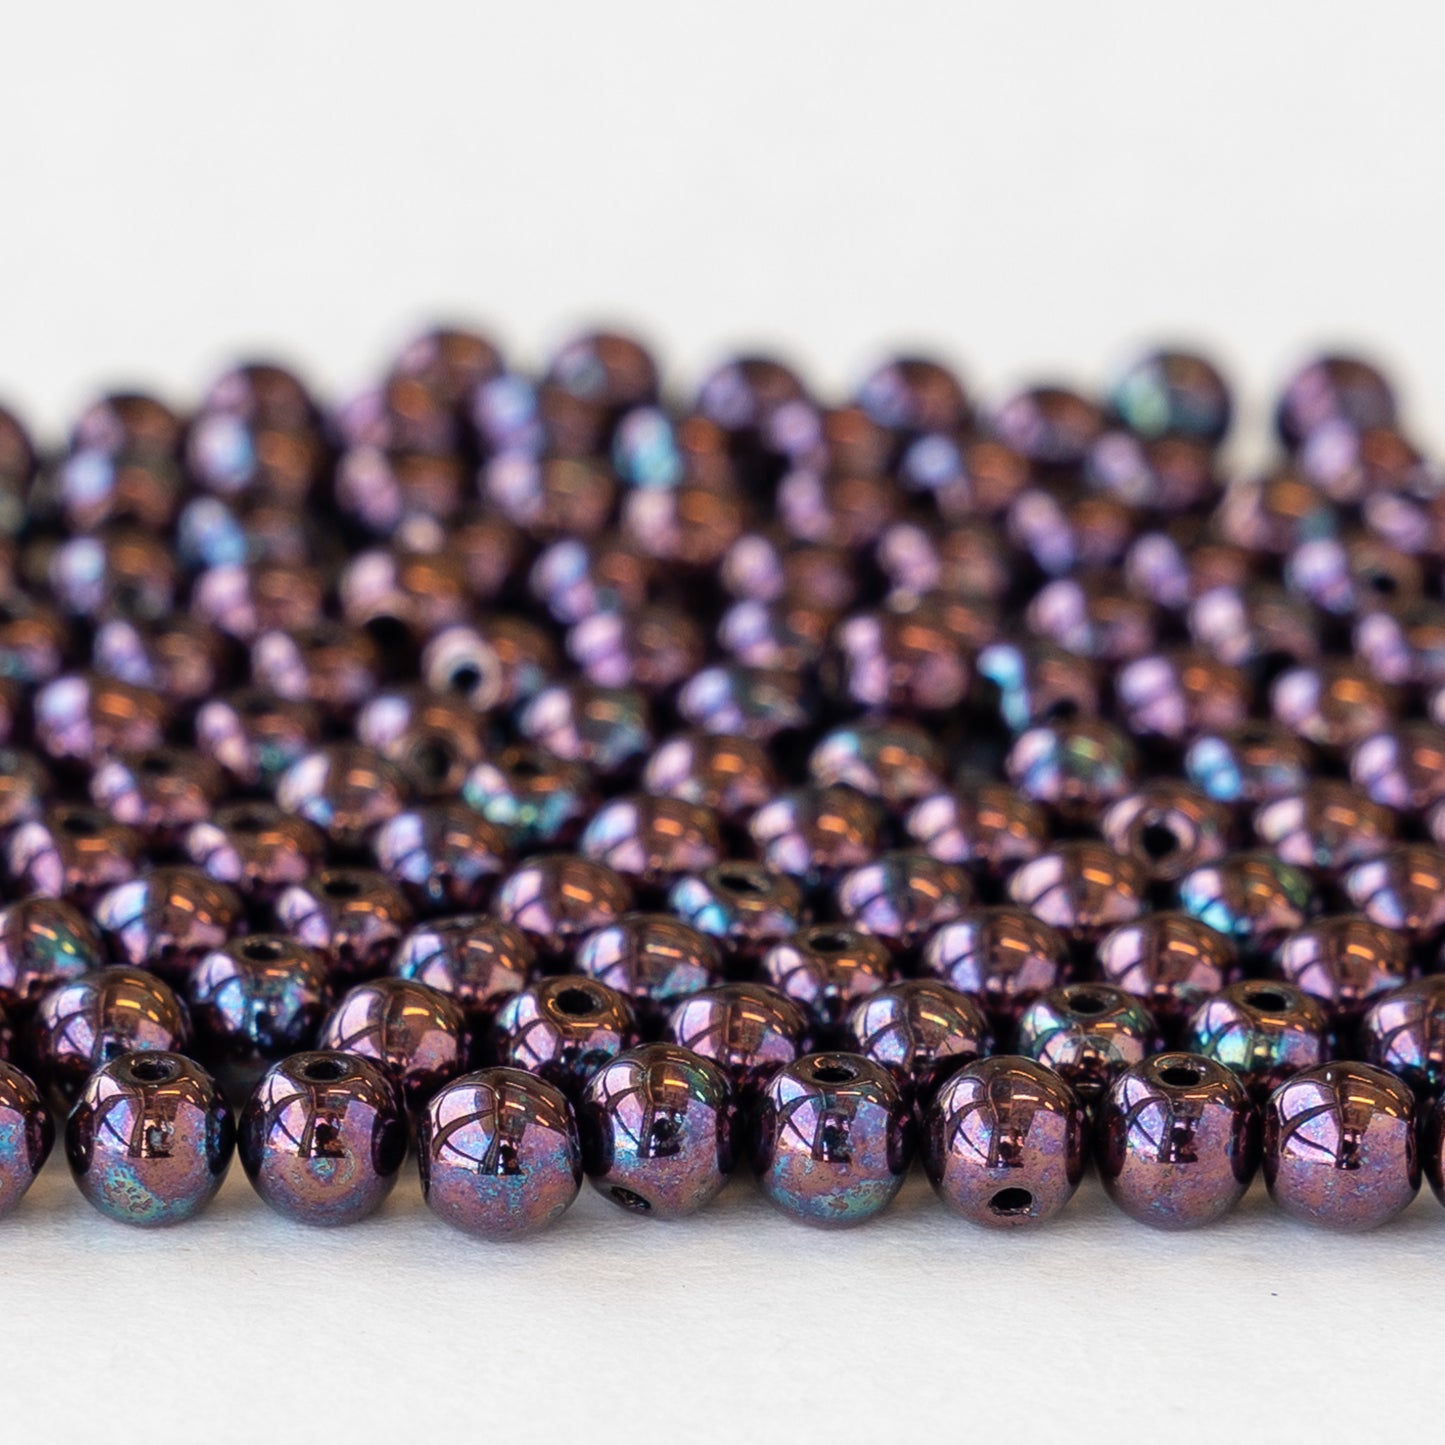 Load image into Gallery viewer, 4mm Round Glass Beads - Deep Eggplant Purple - 100 Beads
